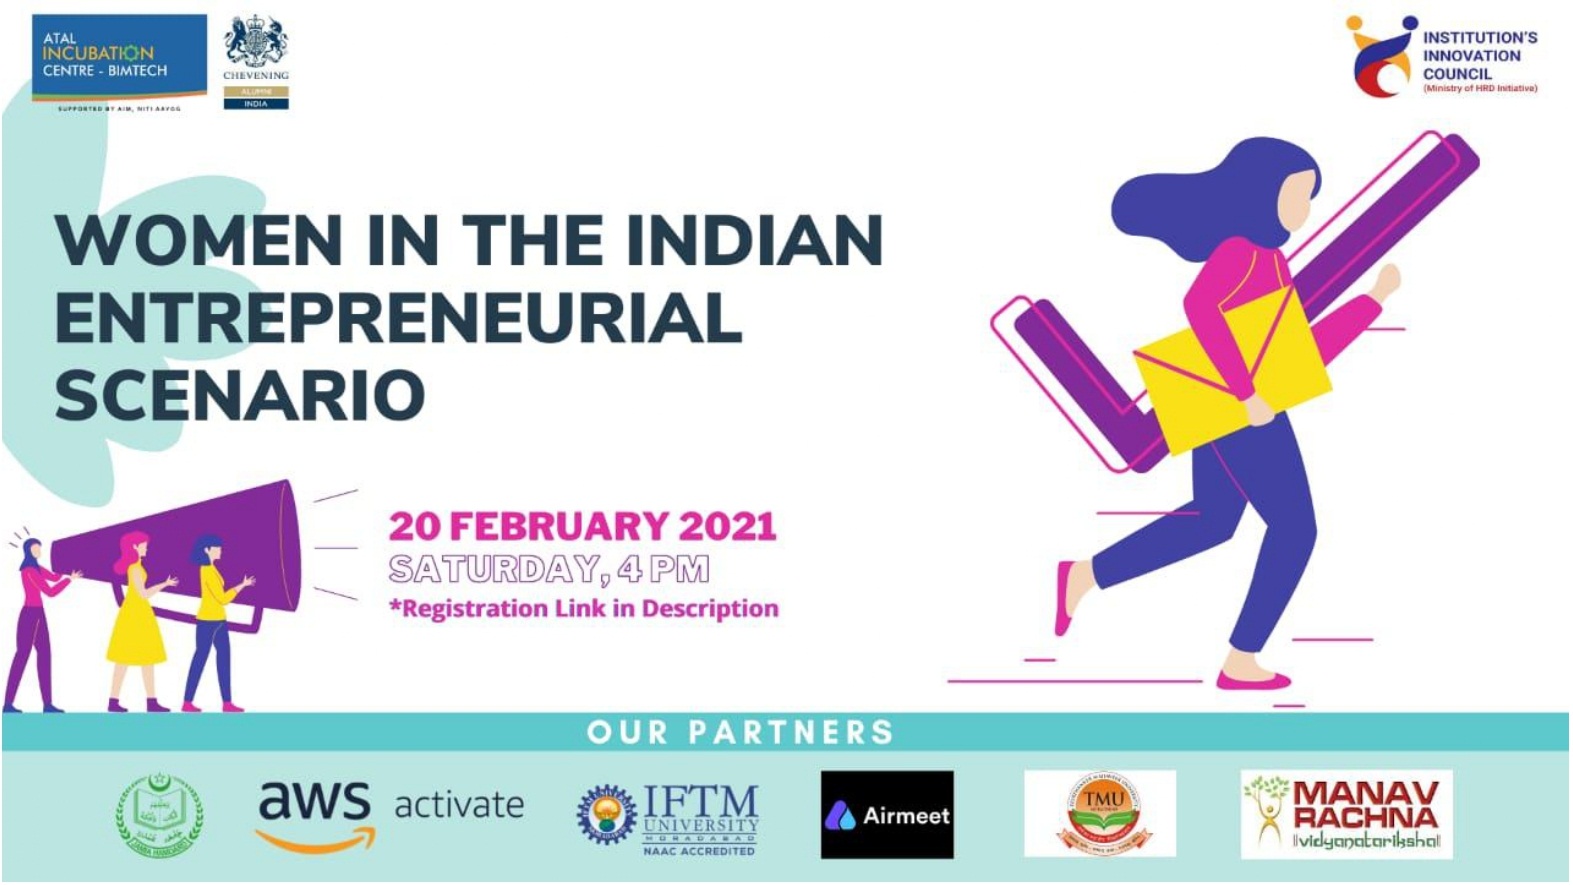 Webinar on Women in the Indian Entrepreneurial Scenario by BIMTECH- Atal Incubation Centre and IFTM UNIVERSITY as an Academic Partner.